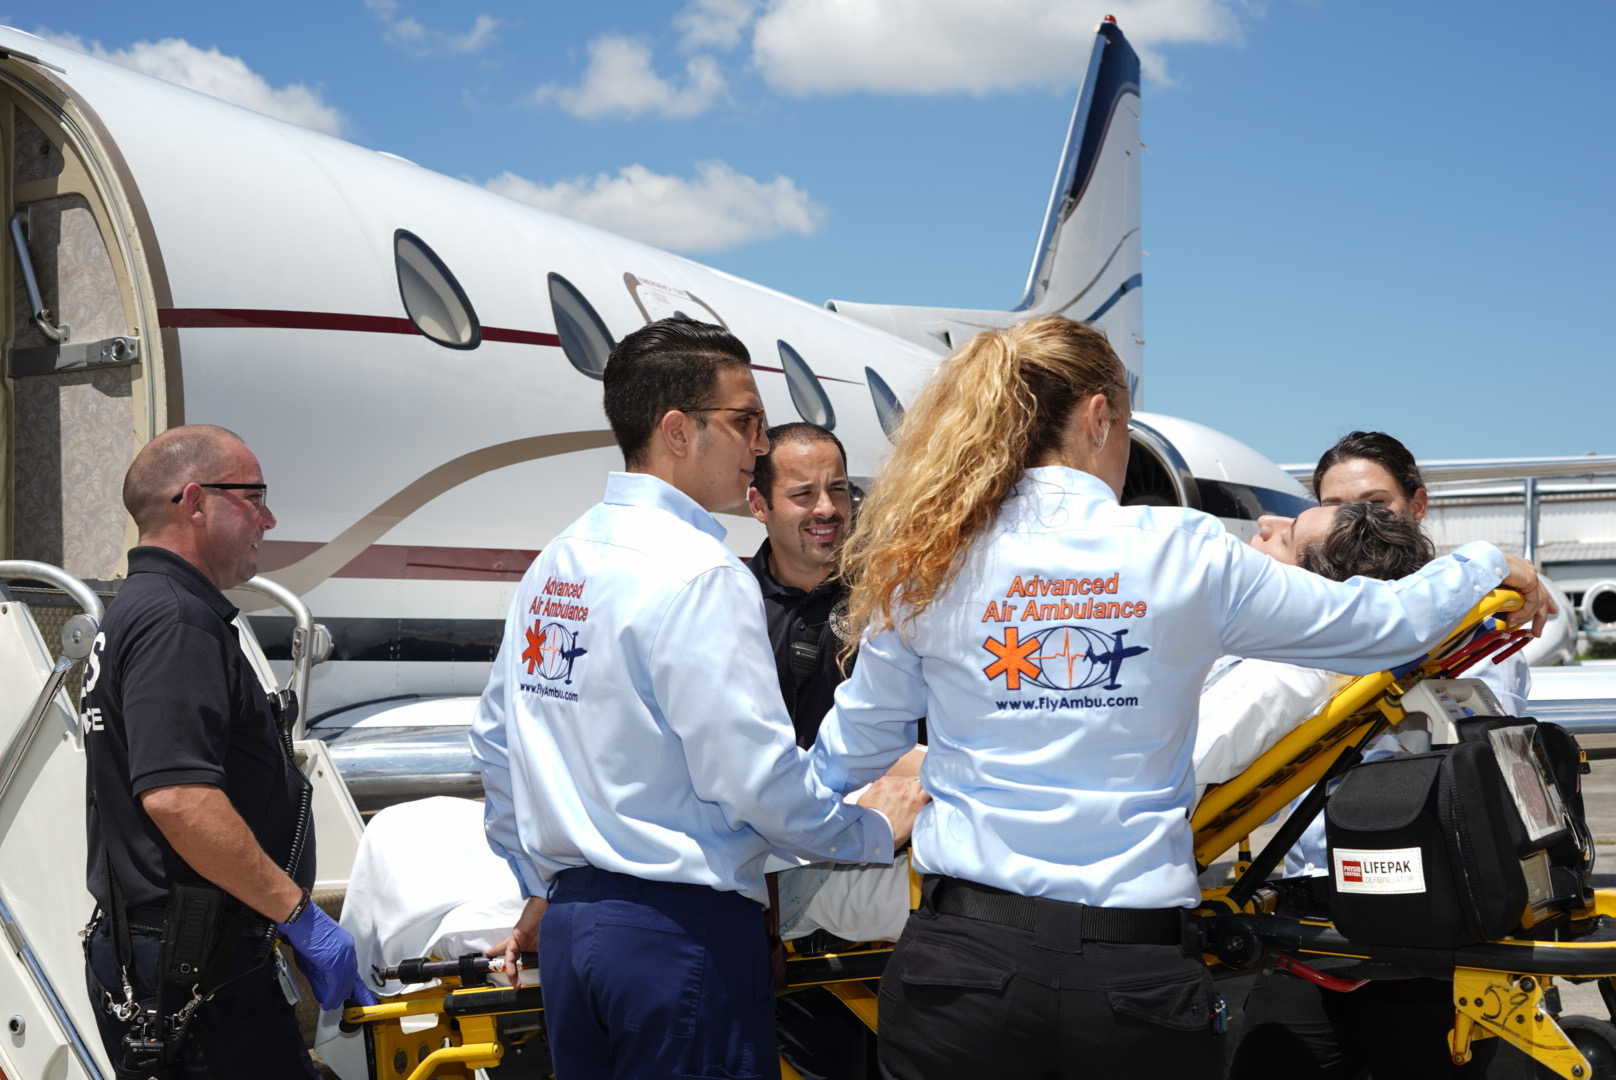 Patient and nurses help load the patient onto the aircraft.